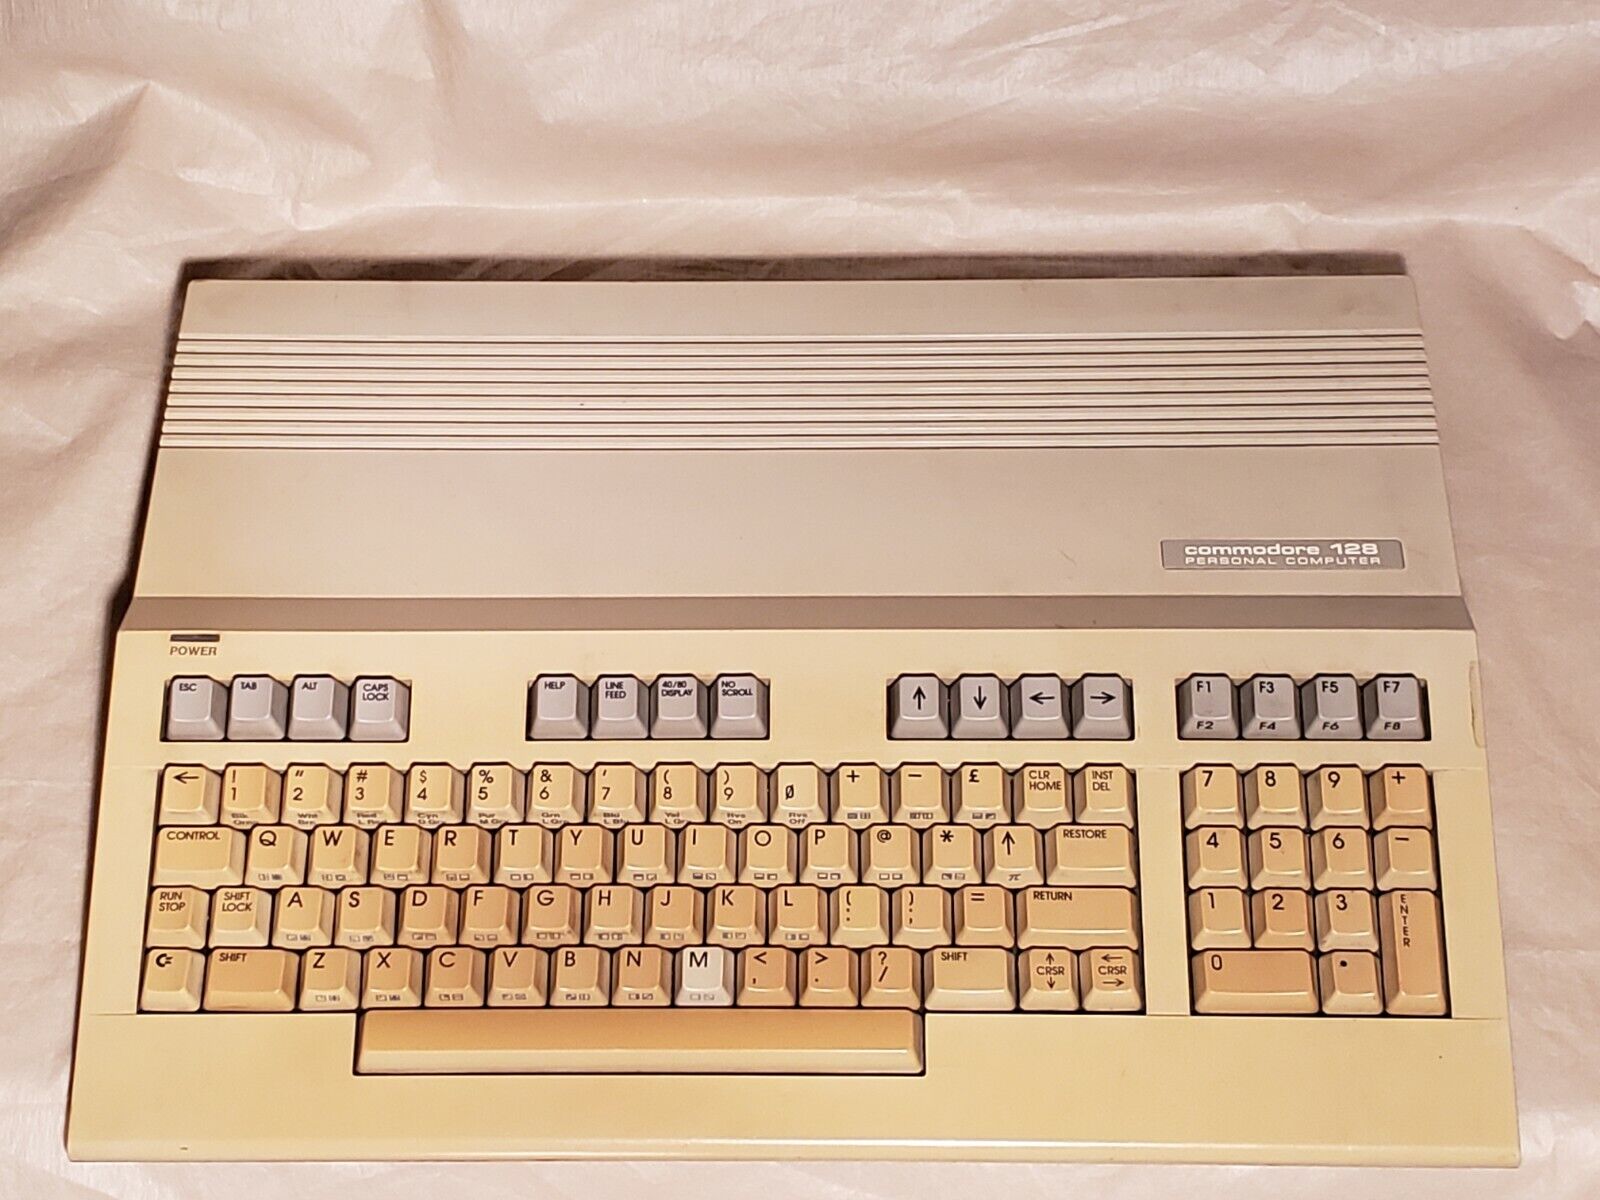 Commodore 128 Personal Computer C64/128 Vintage Gaming Computer w/ manual 1985